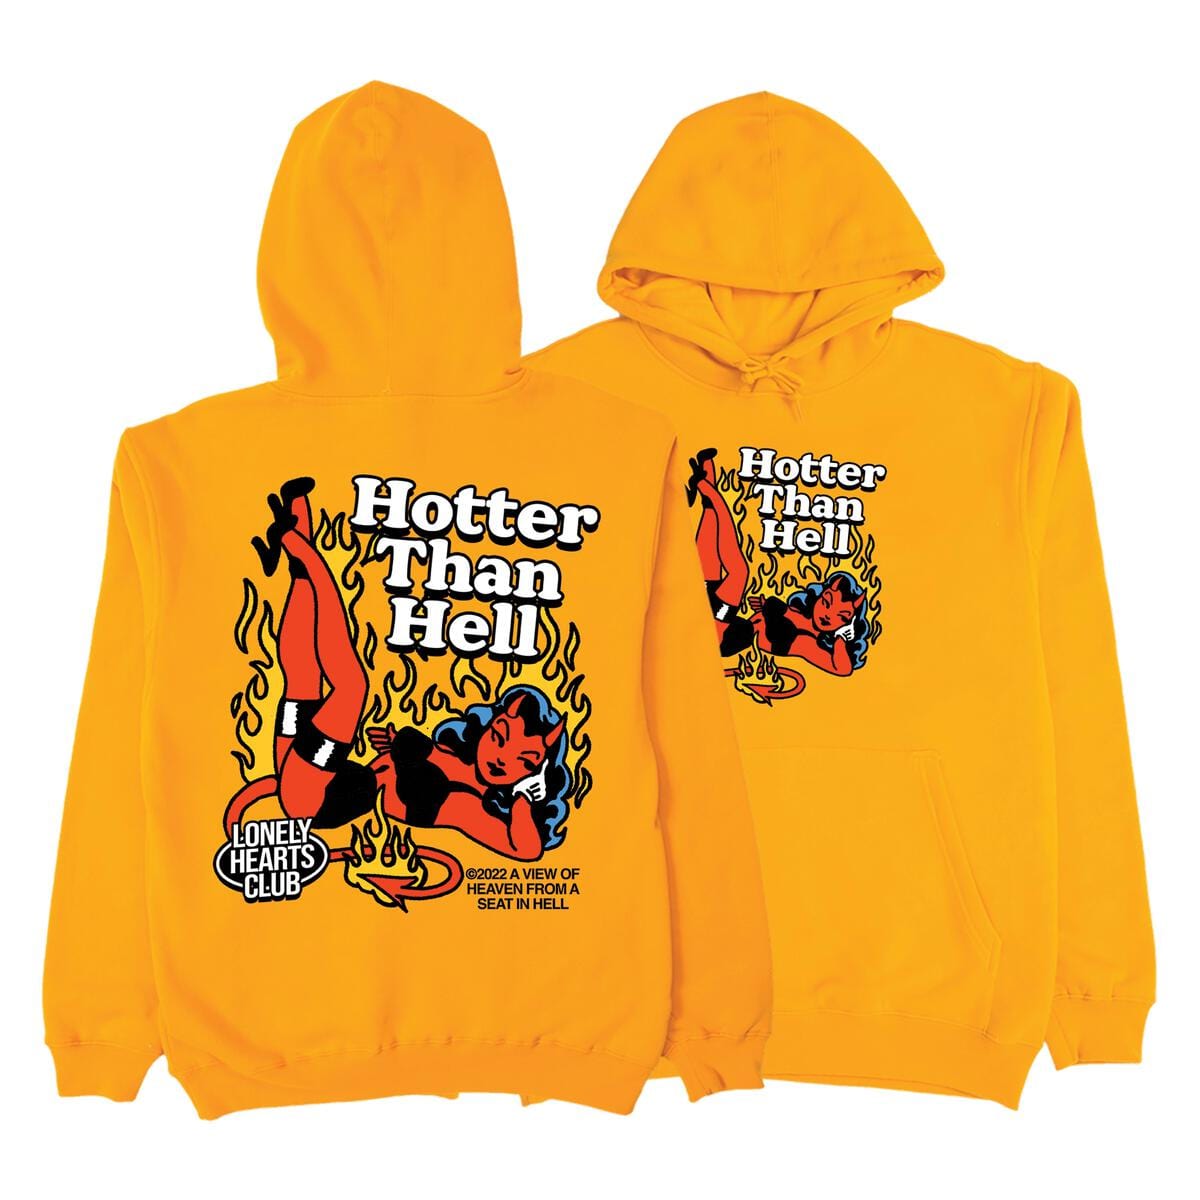 LONLY HEARTS T SHIRT S / gold Gold Hotter than Hell Hoodie